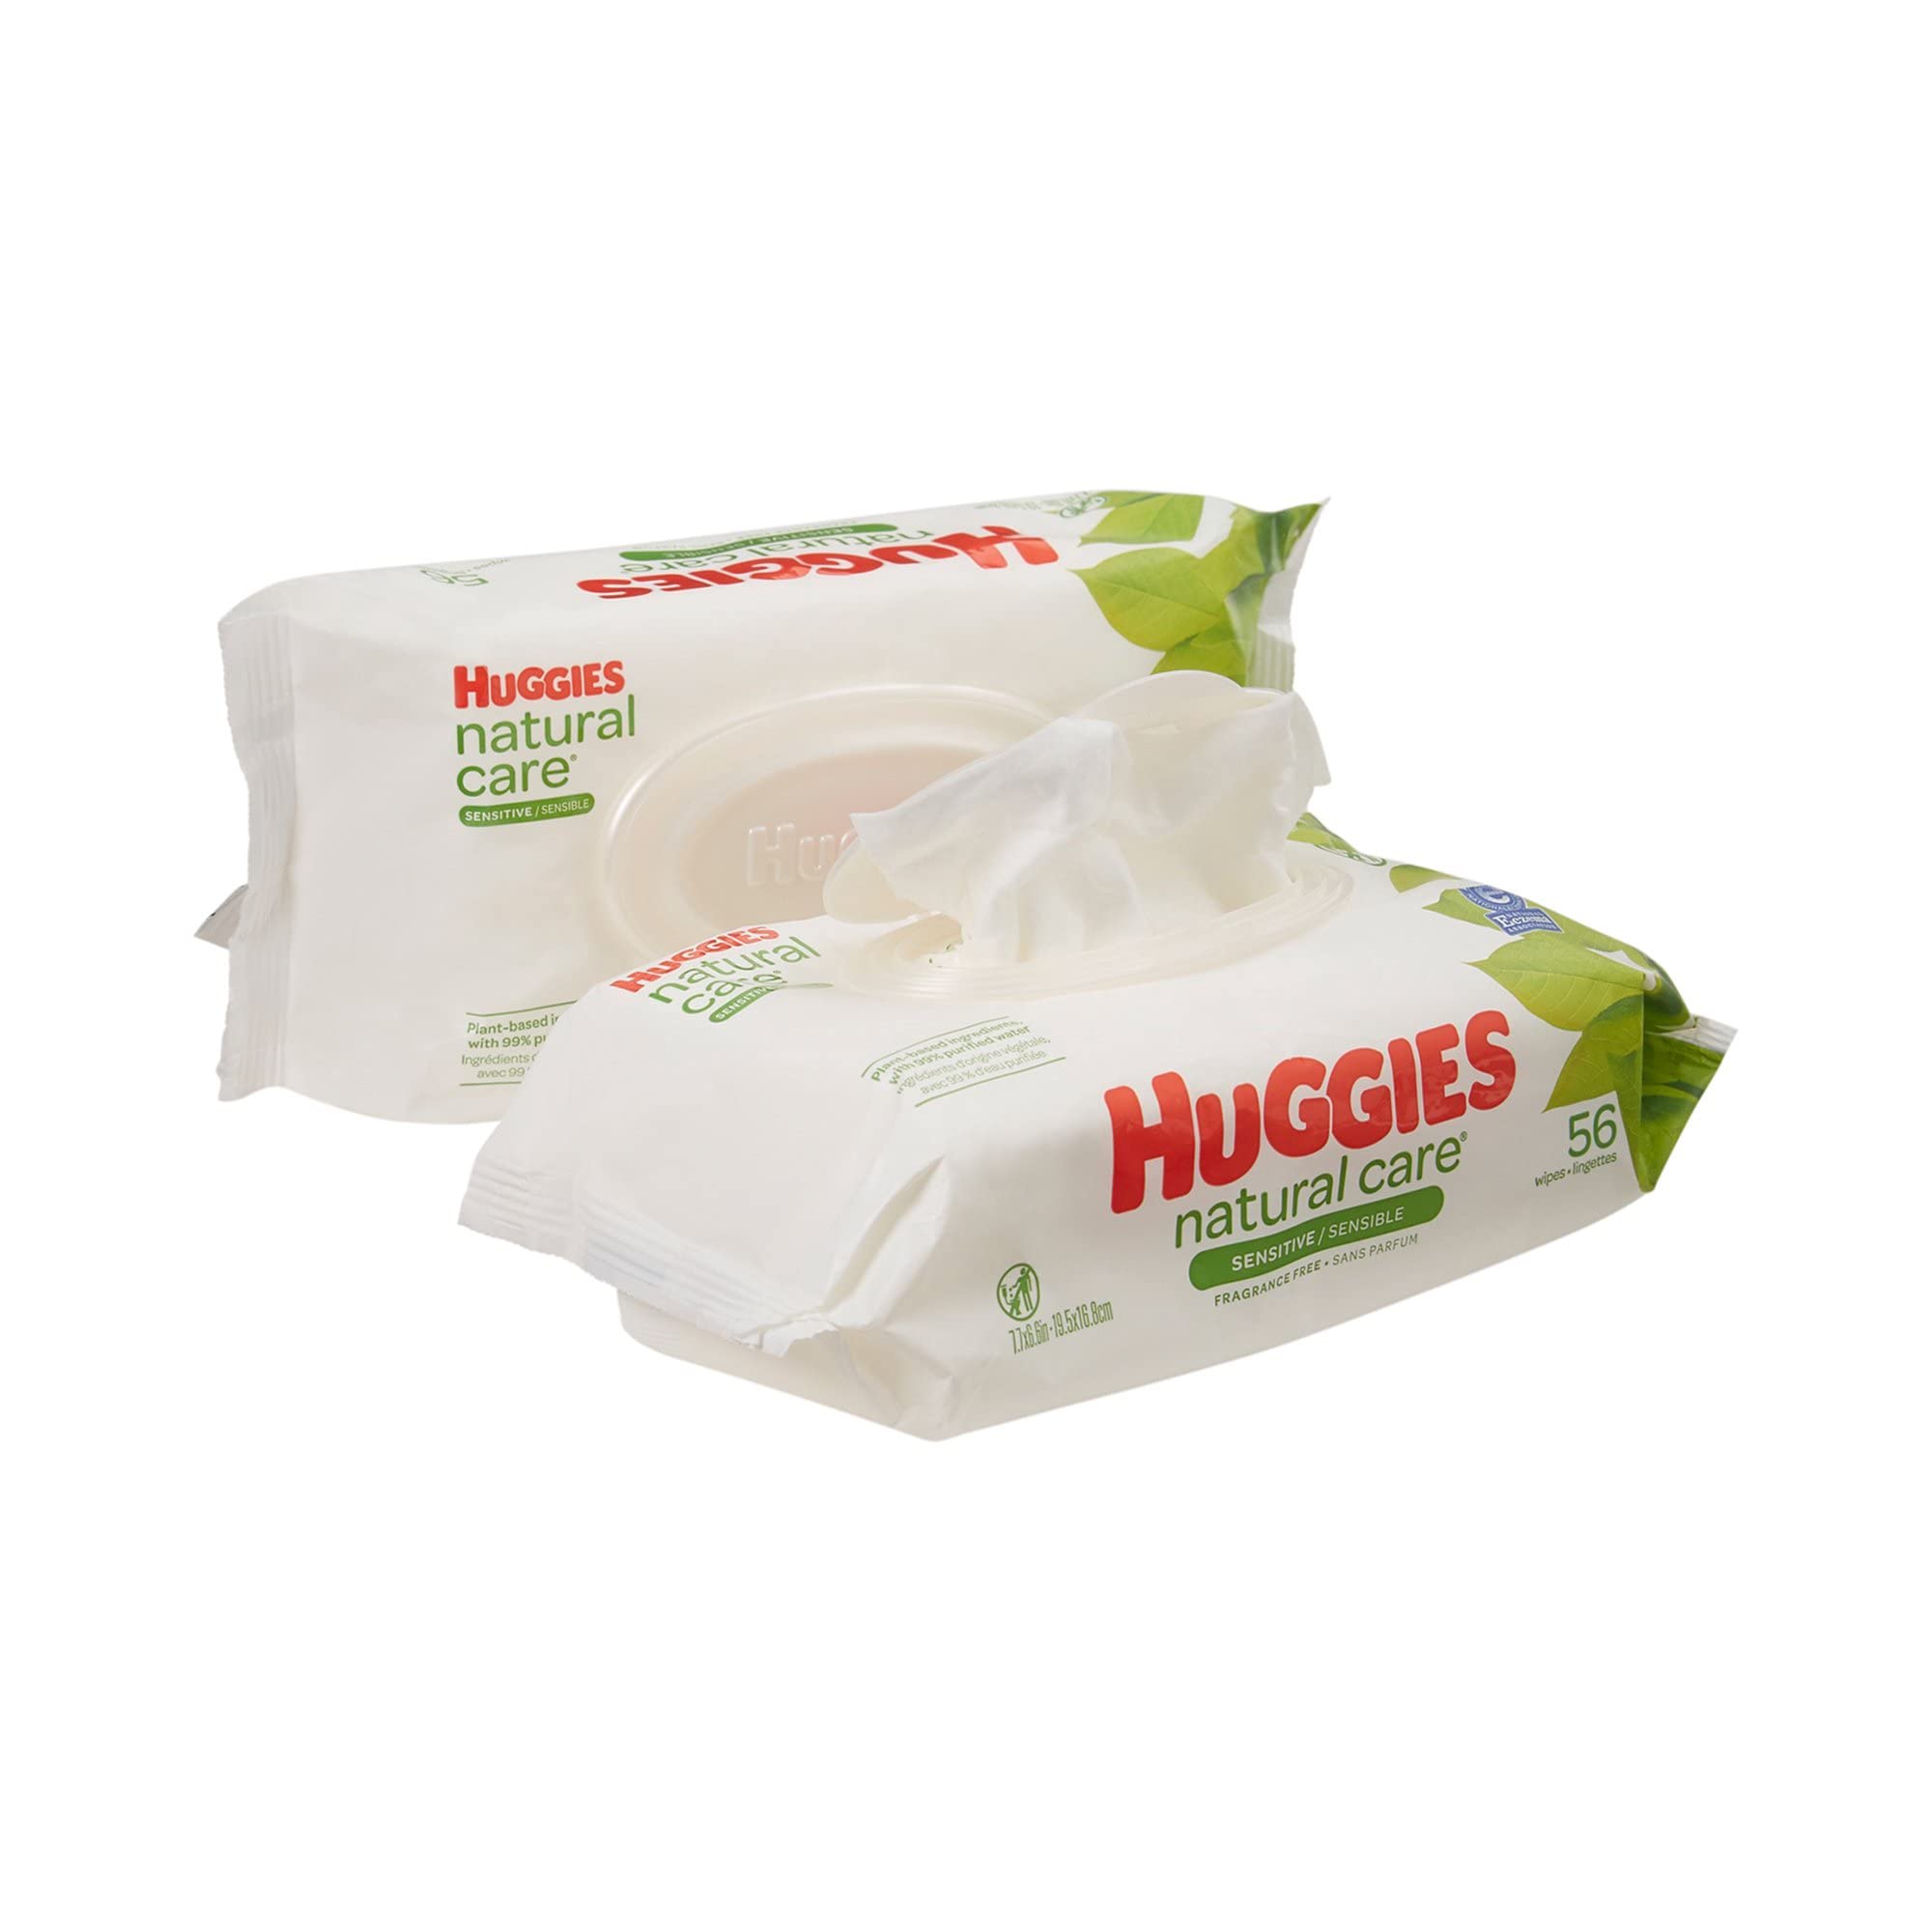 Huggies Natural Care Fragrance Free Baby Wipes, 112 Total Wipes 56 Count Each (Pack of 2)